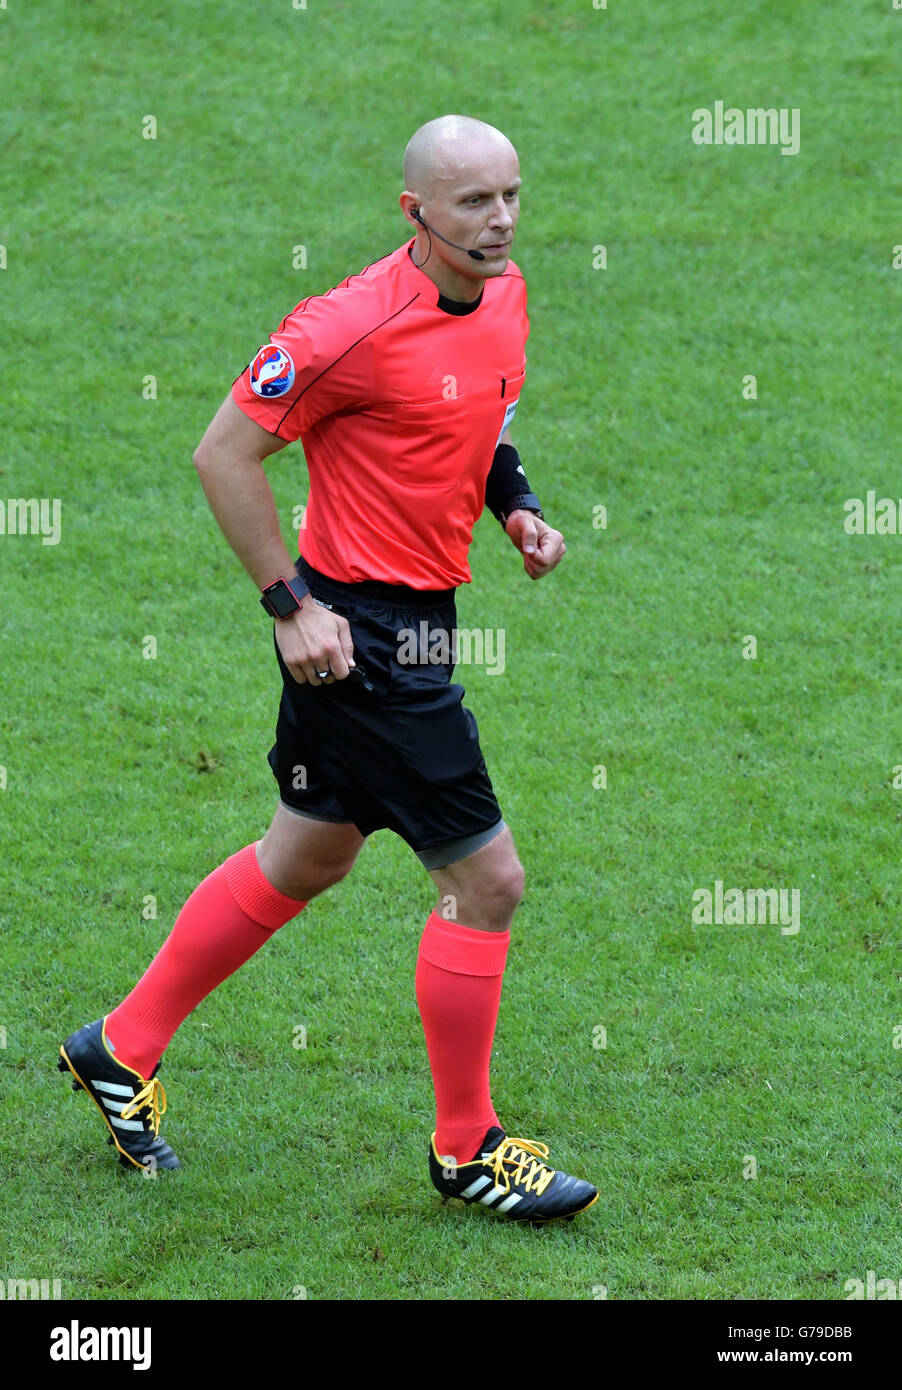 Lille, France. 26th June, 2016. Referee Szymon Marciniak of Poland during the UEFA EURO 2016 Round of 16 soccer match between Germany and Slovakia at the Pierre Mauroy stadium in Lille, France, 26 June 2016. Photo: Peter Kneffel/dpa/Alamy Live News Stock Photo